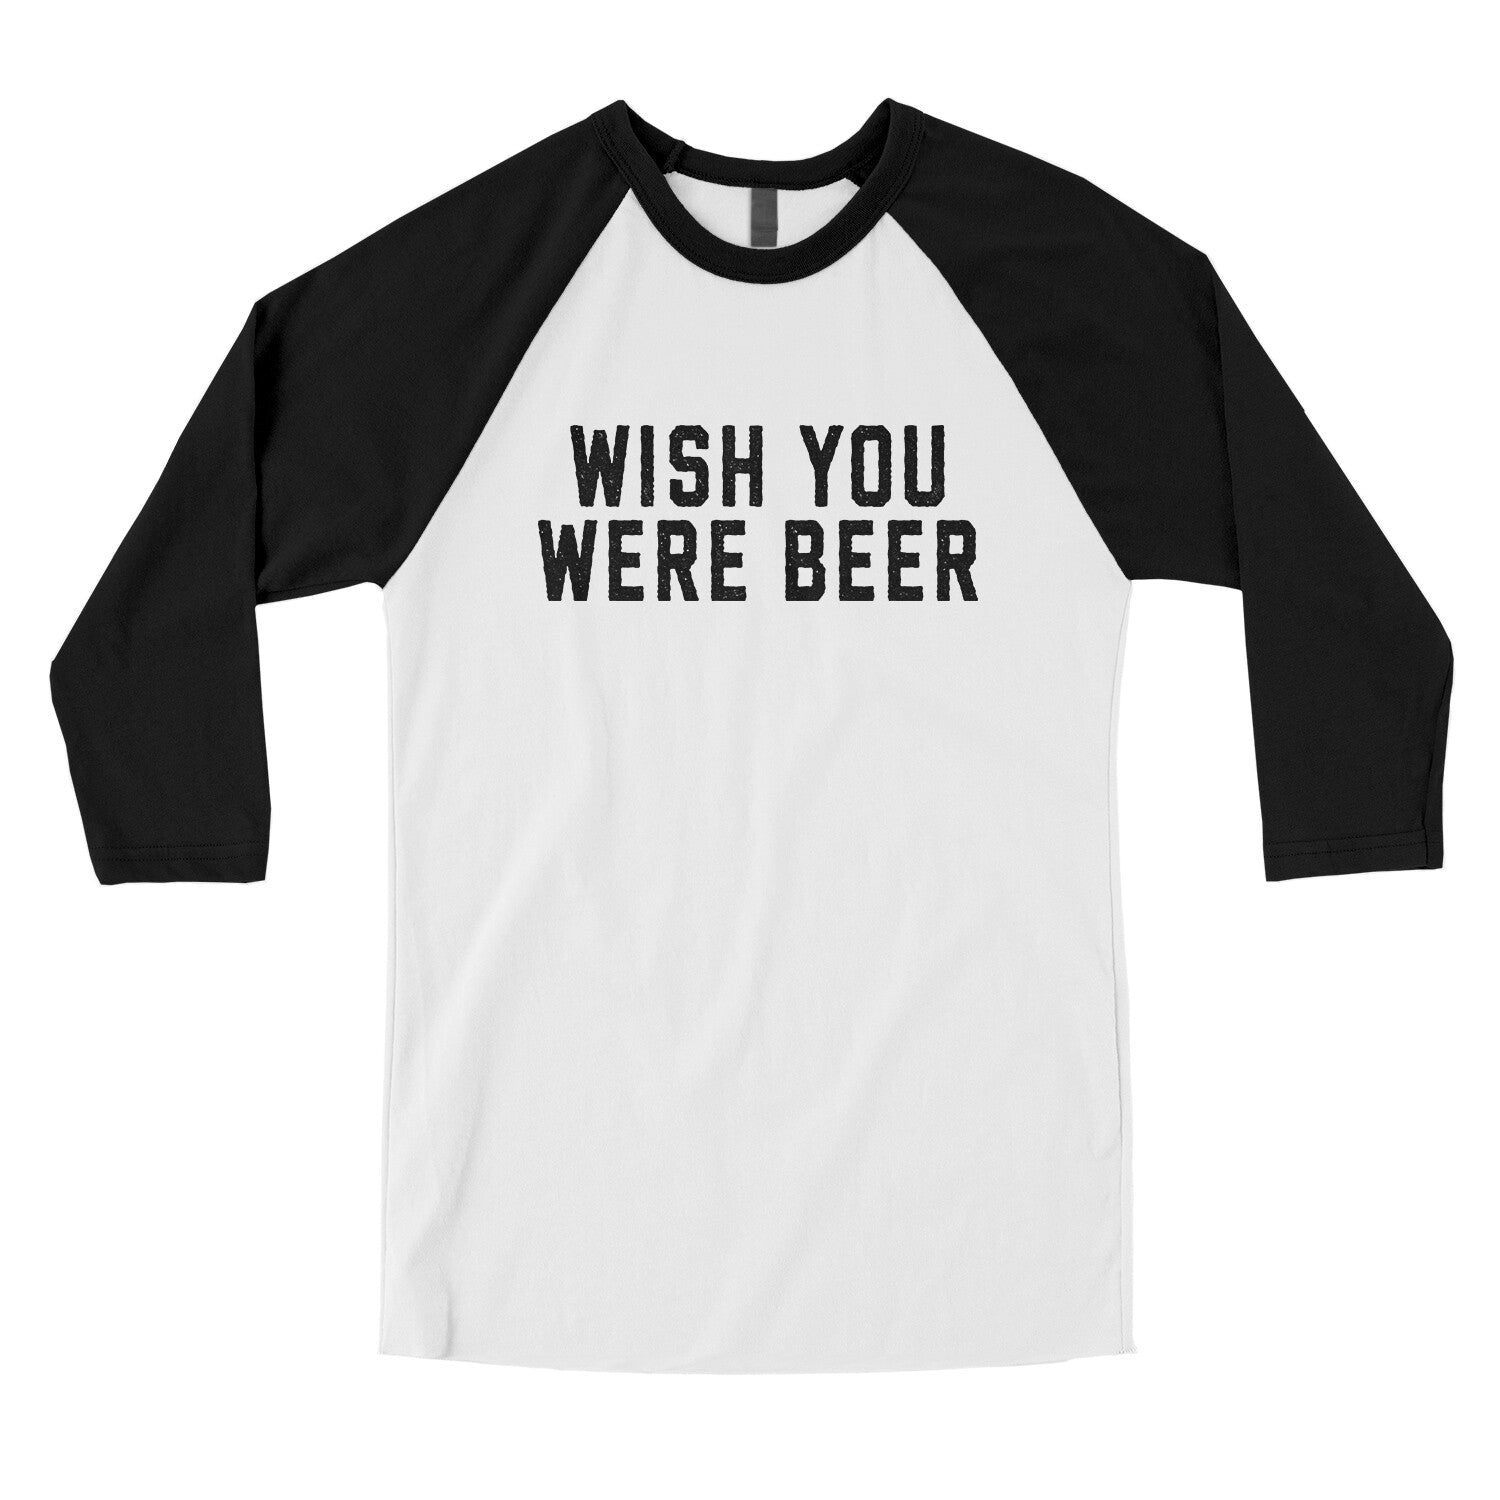 Wish You Were Beer in White with Black Color